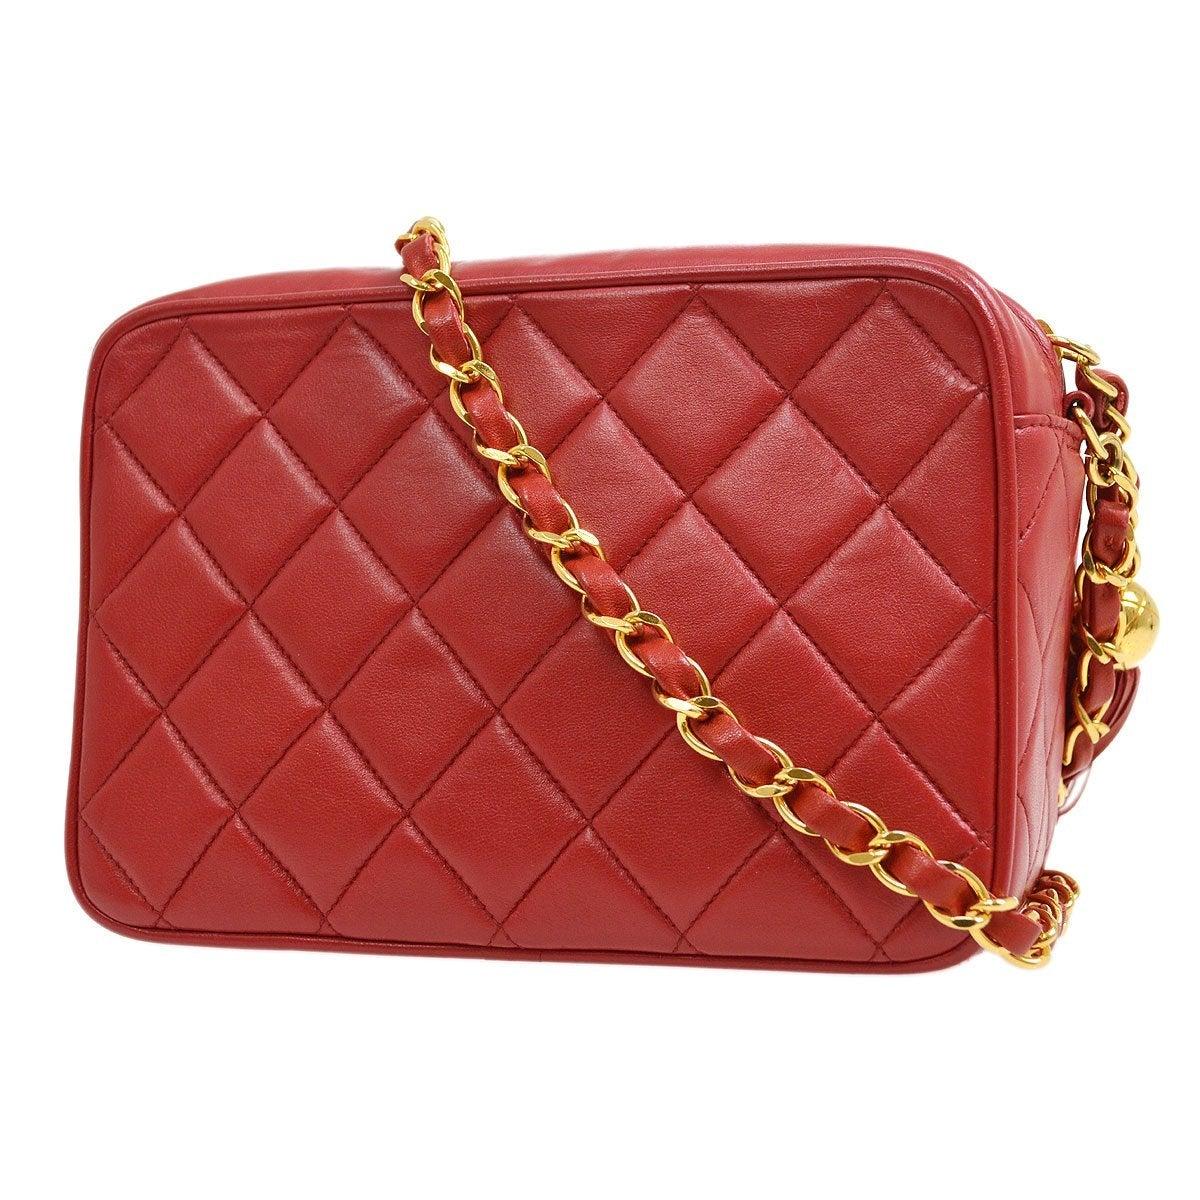 chanel red camera bag